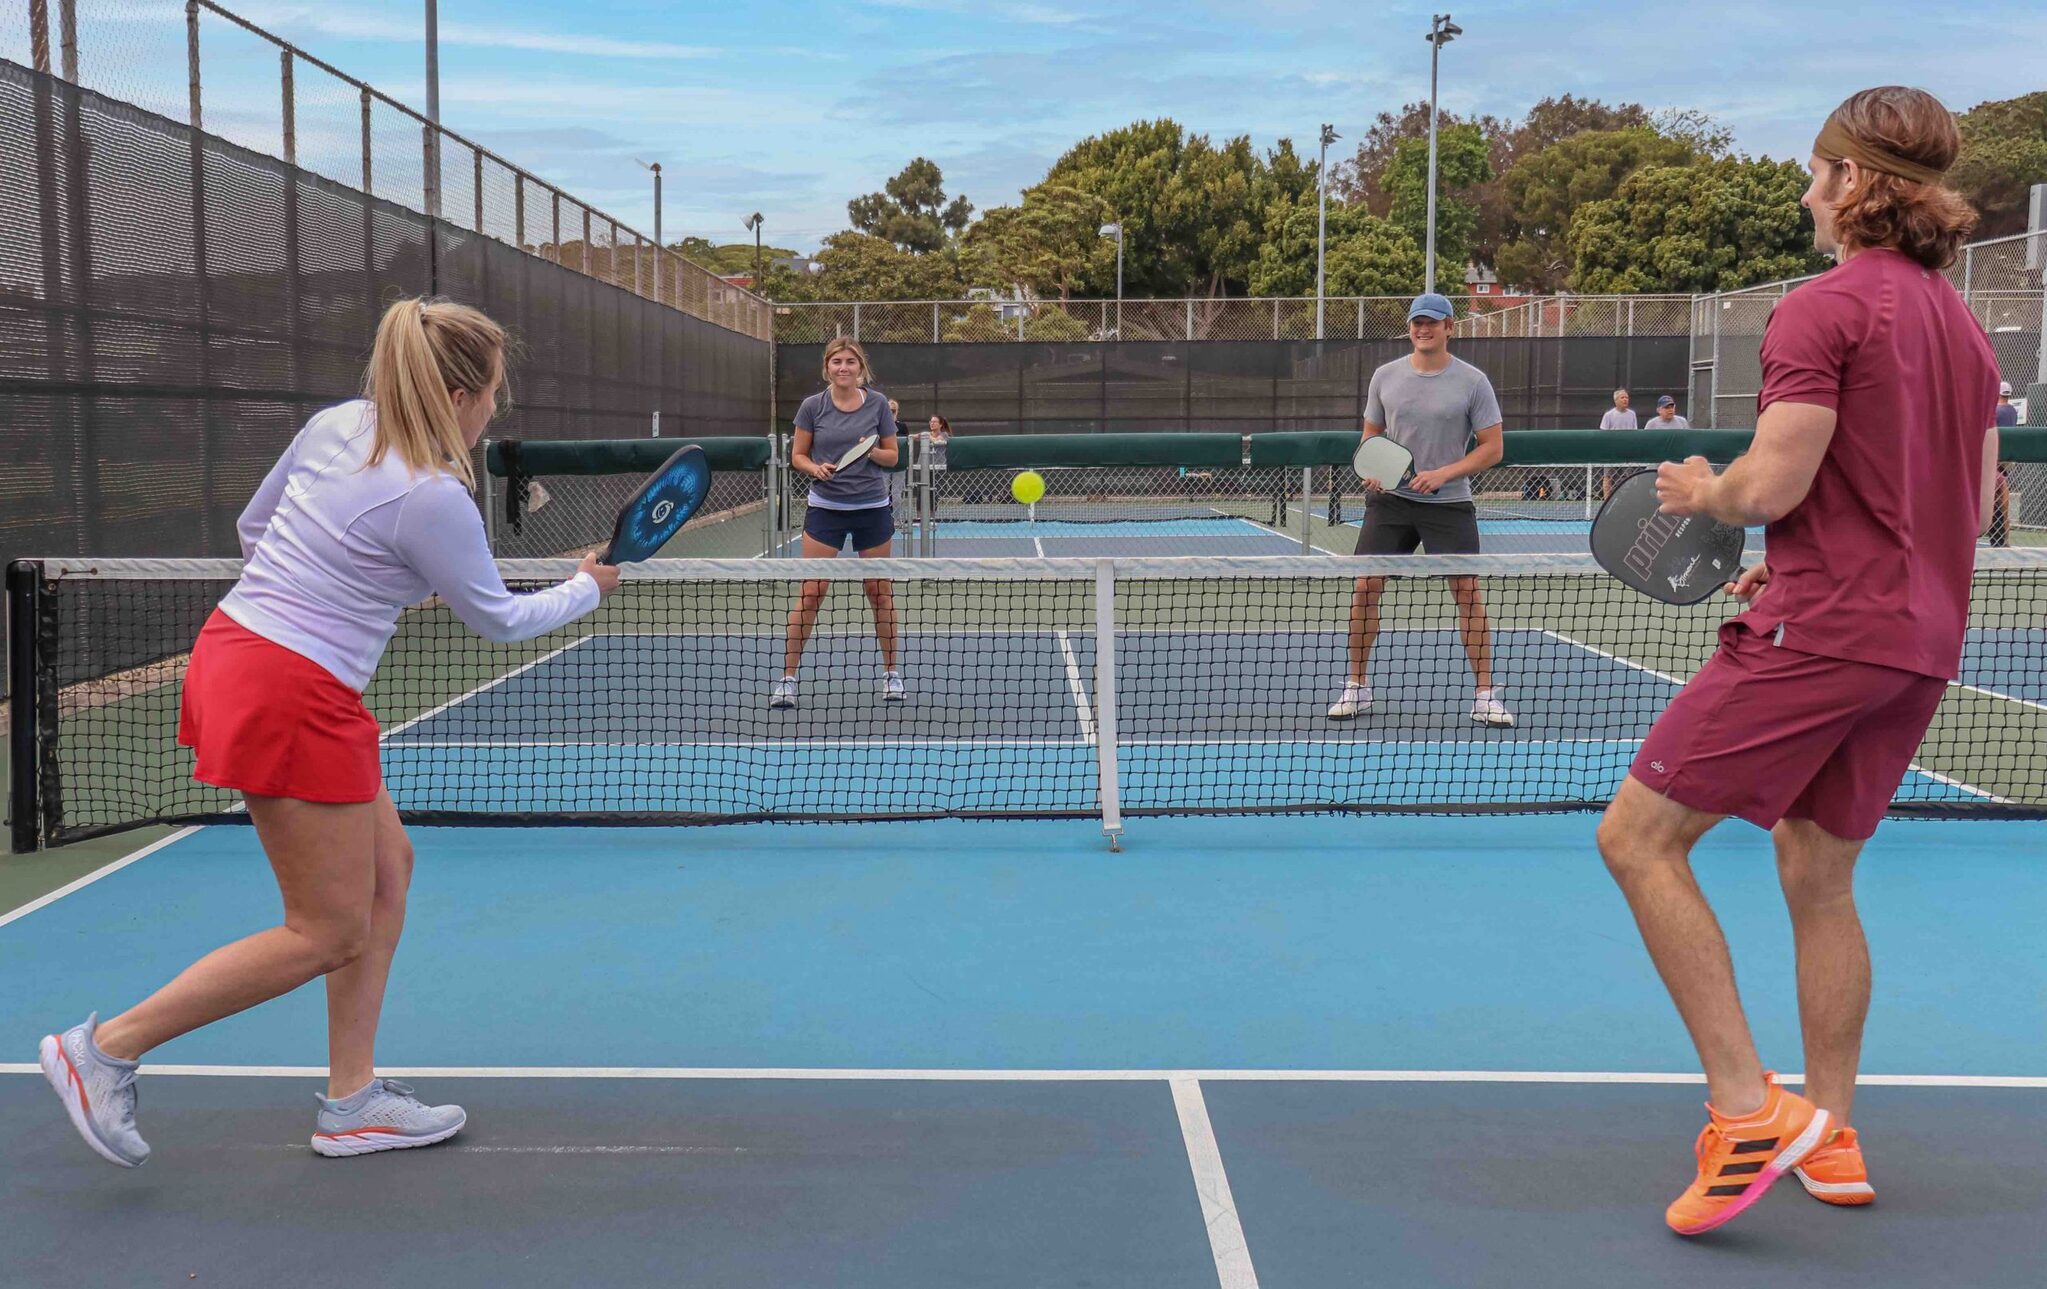 An image of people playing pickleball.